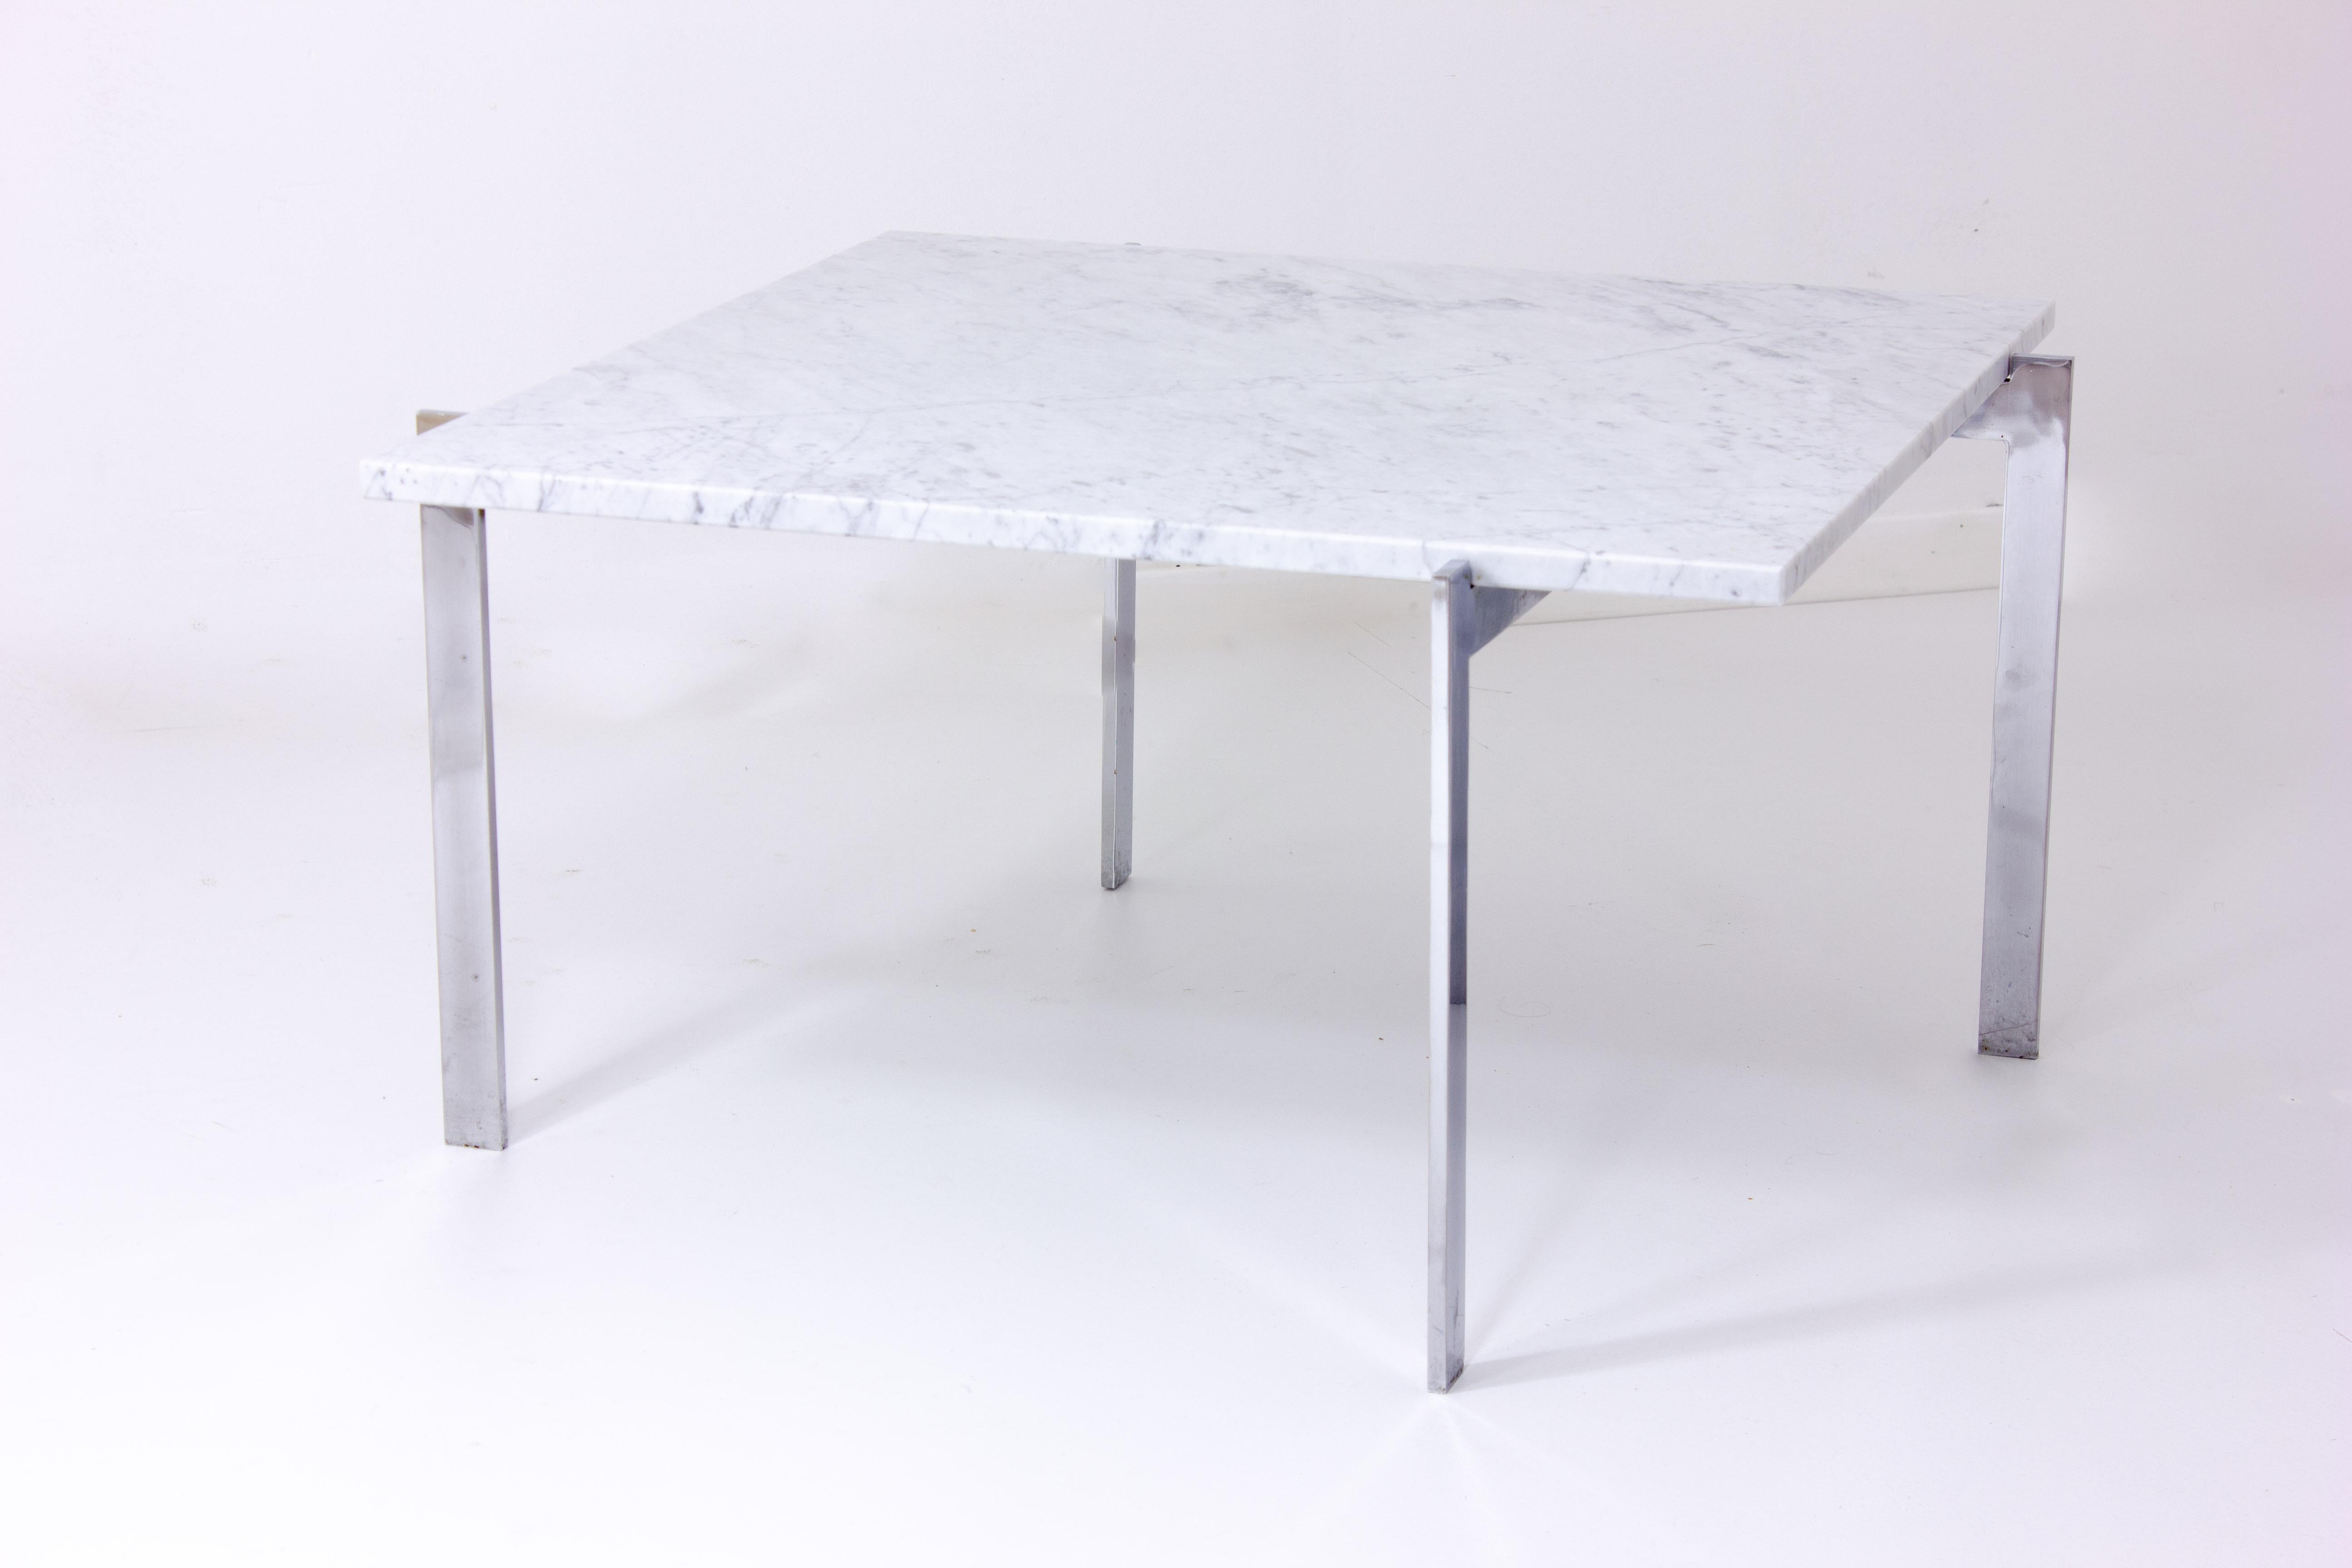 A stunning white carrara marble coffee table with betal base. The marble slate top shows an elegant play with colours between white, grey and dark grey.